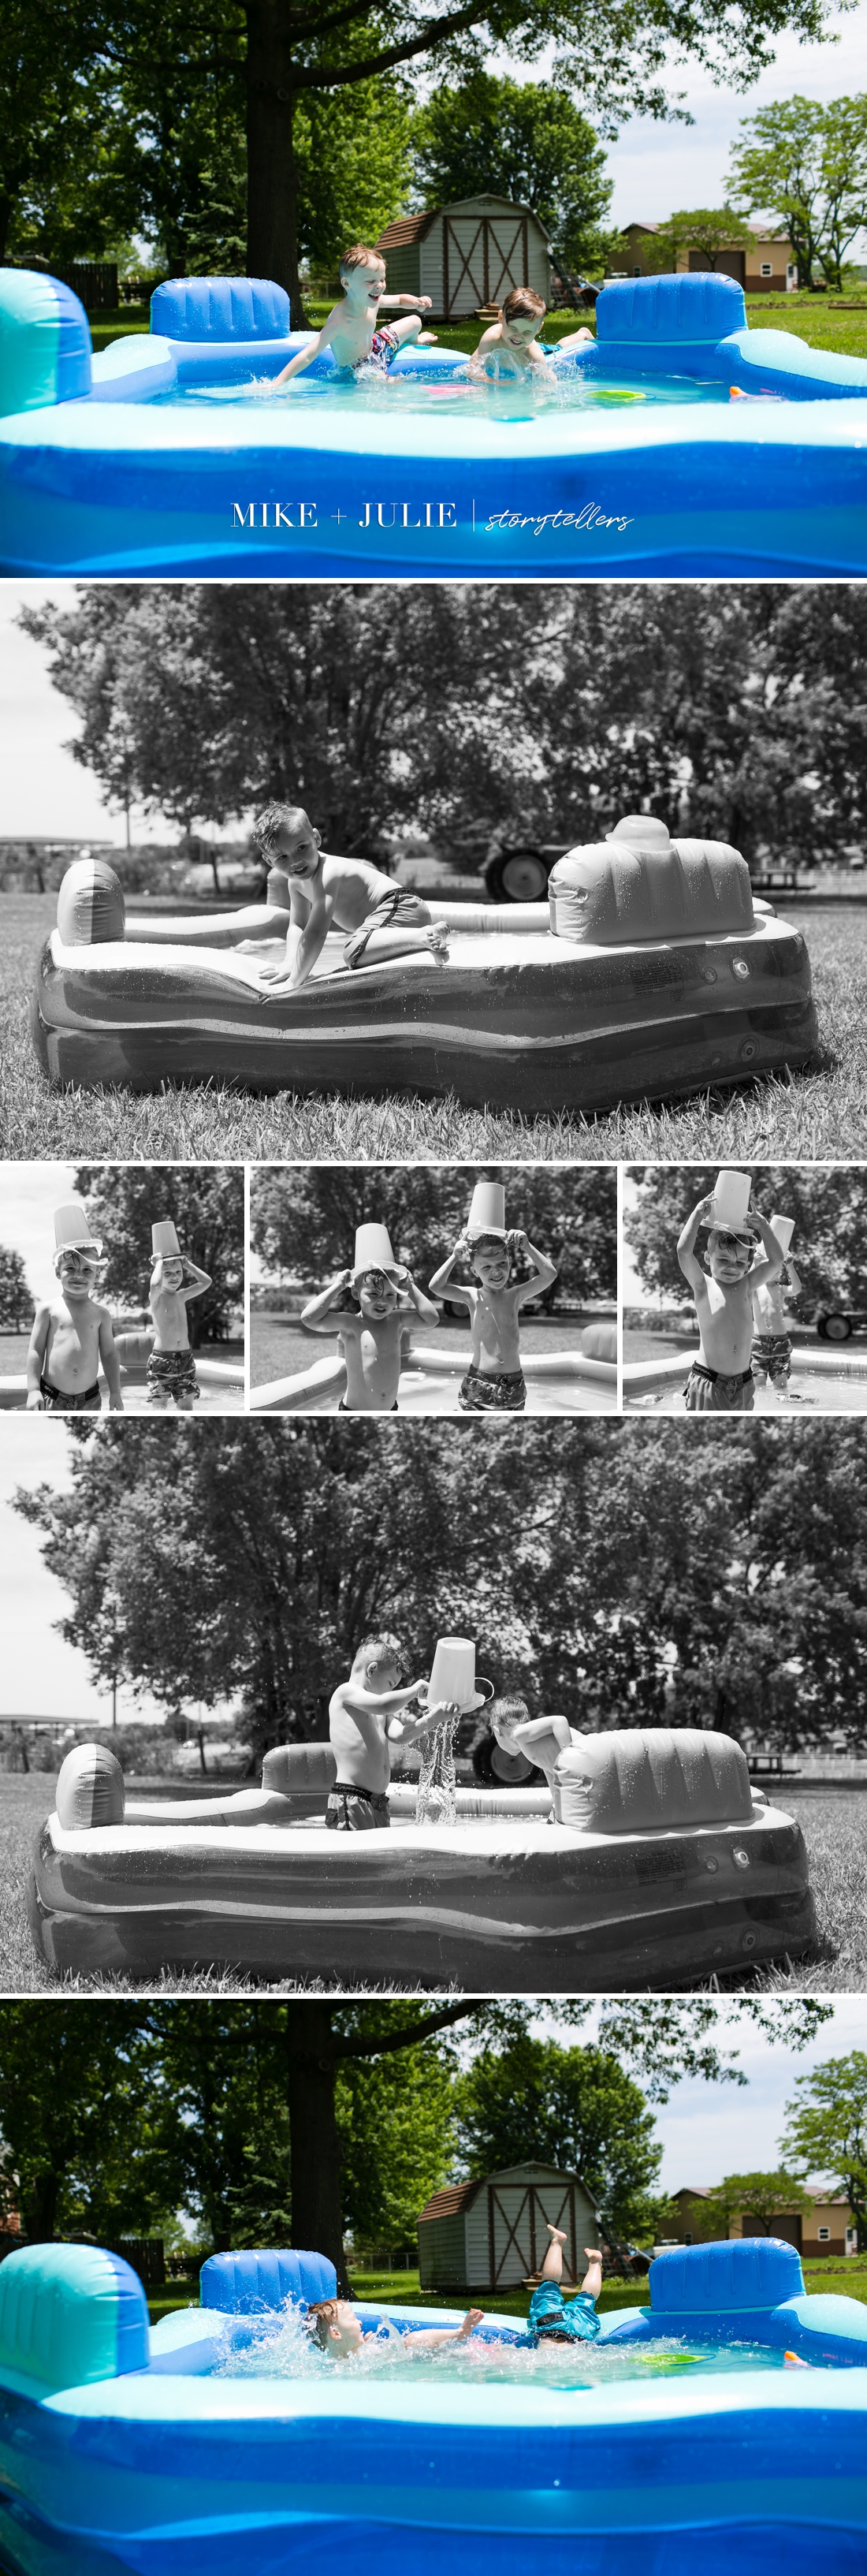 Kansas City UNportrait Experience document fun of childhood at pool picture